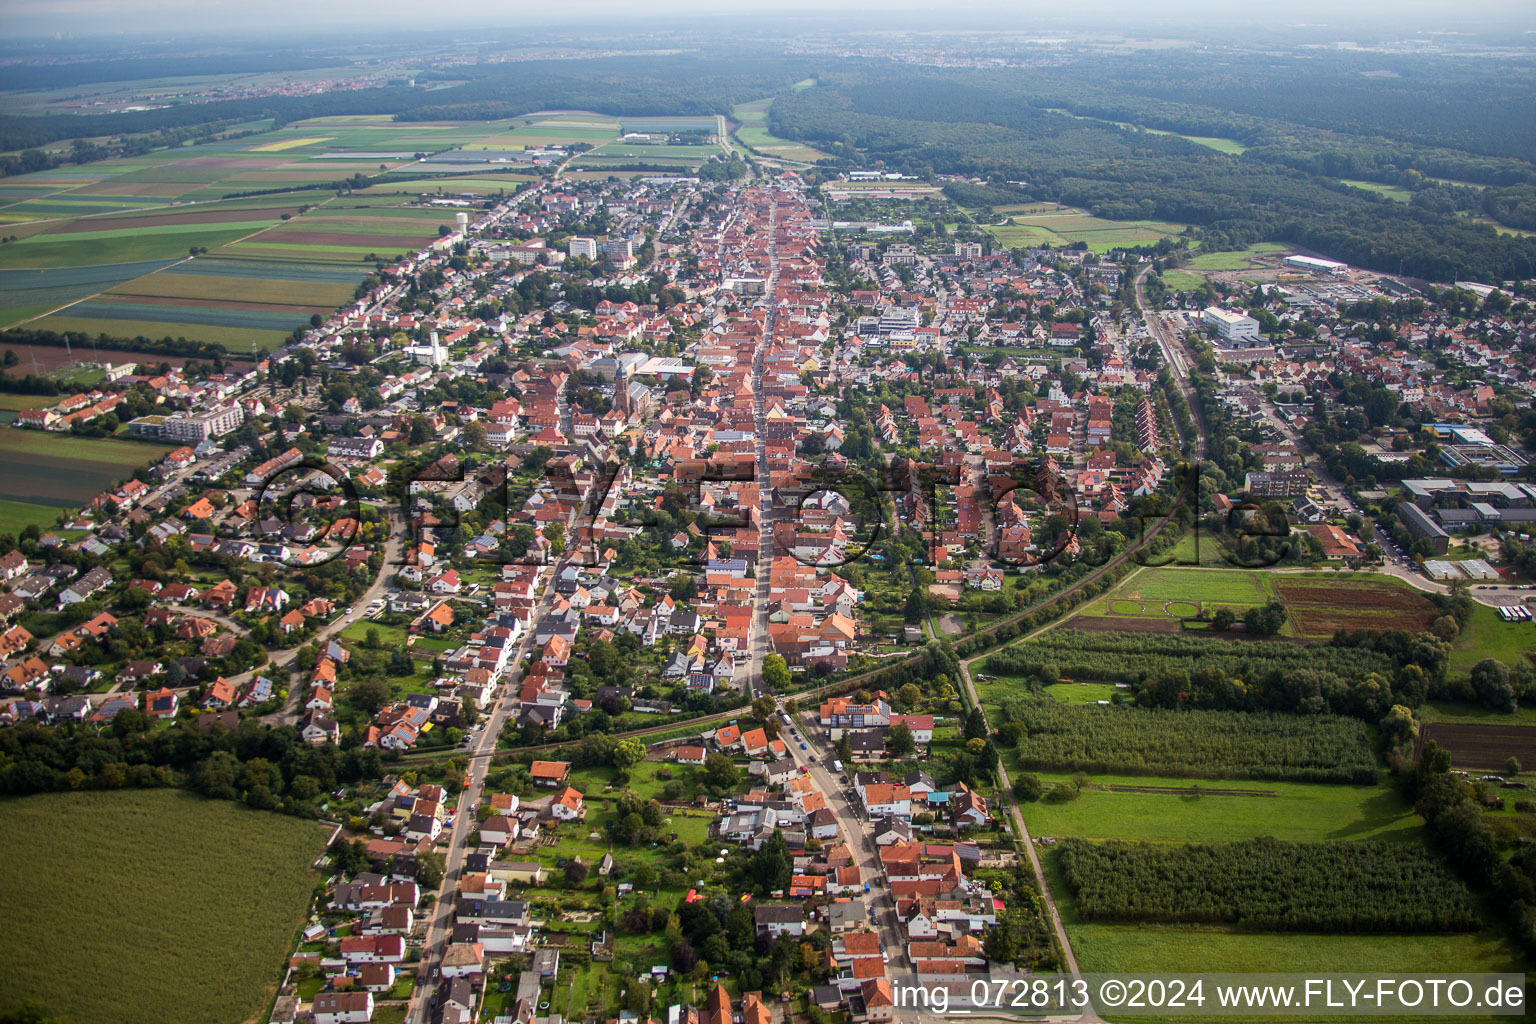 Town View of the streets and houses of the residential areas in Kandel in the state Rhineland-Palatinate, Germany